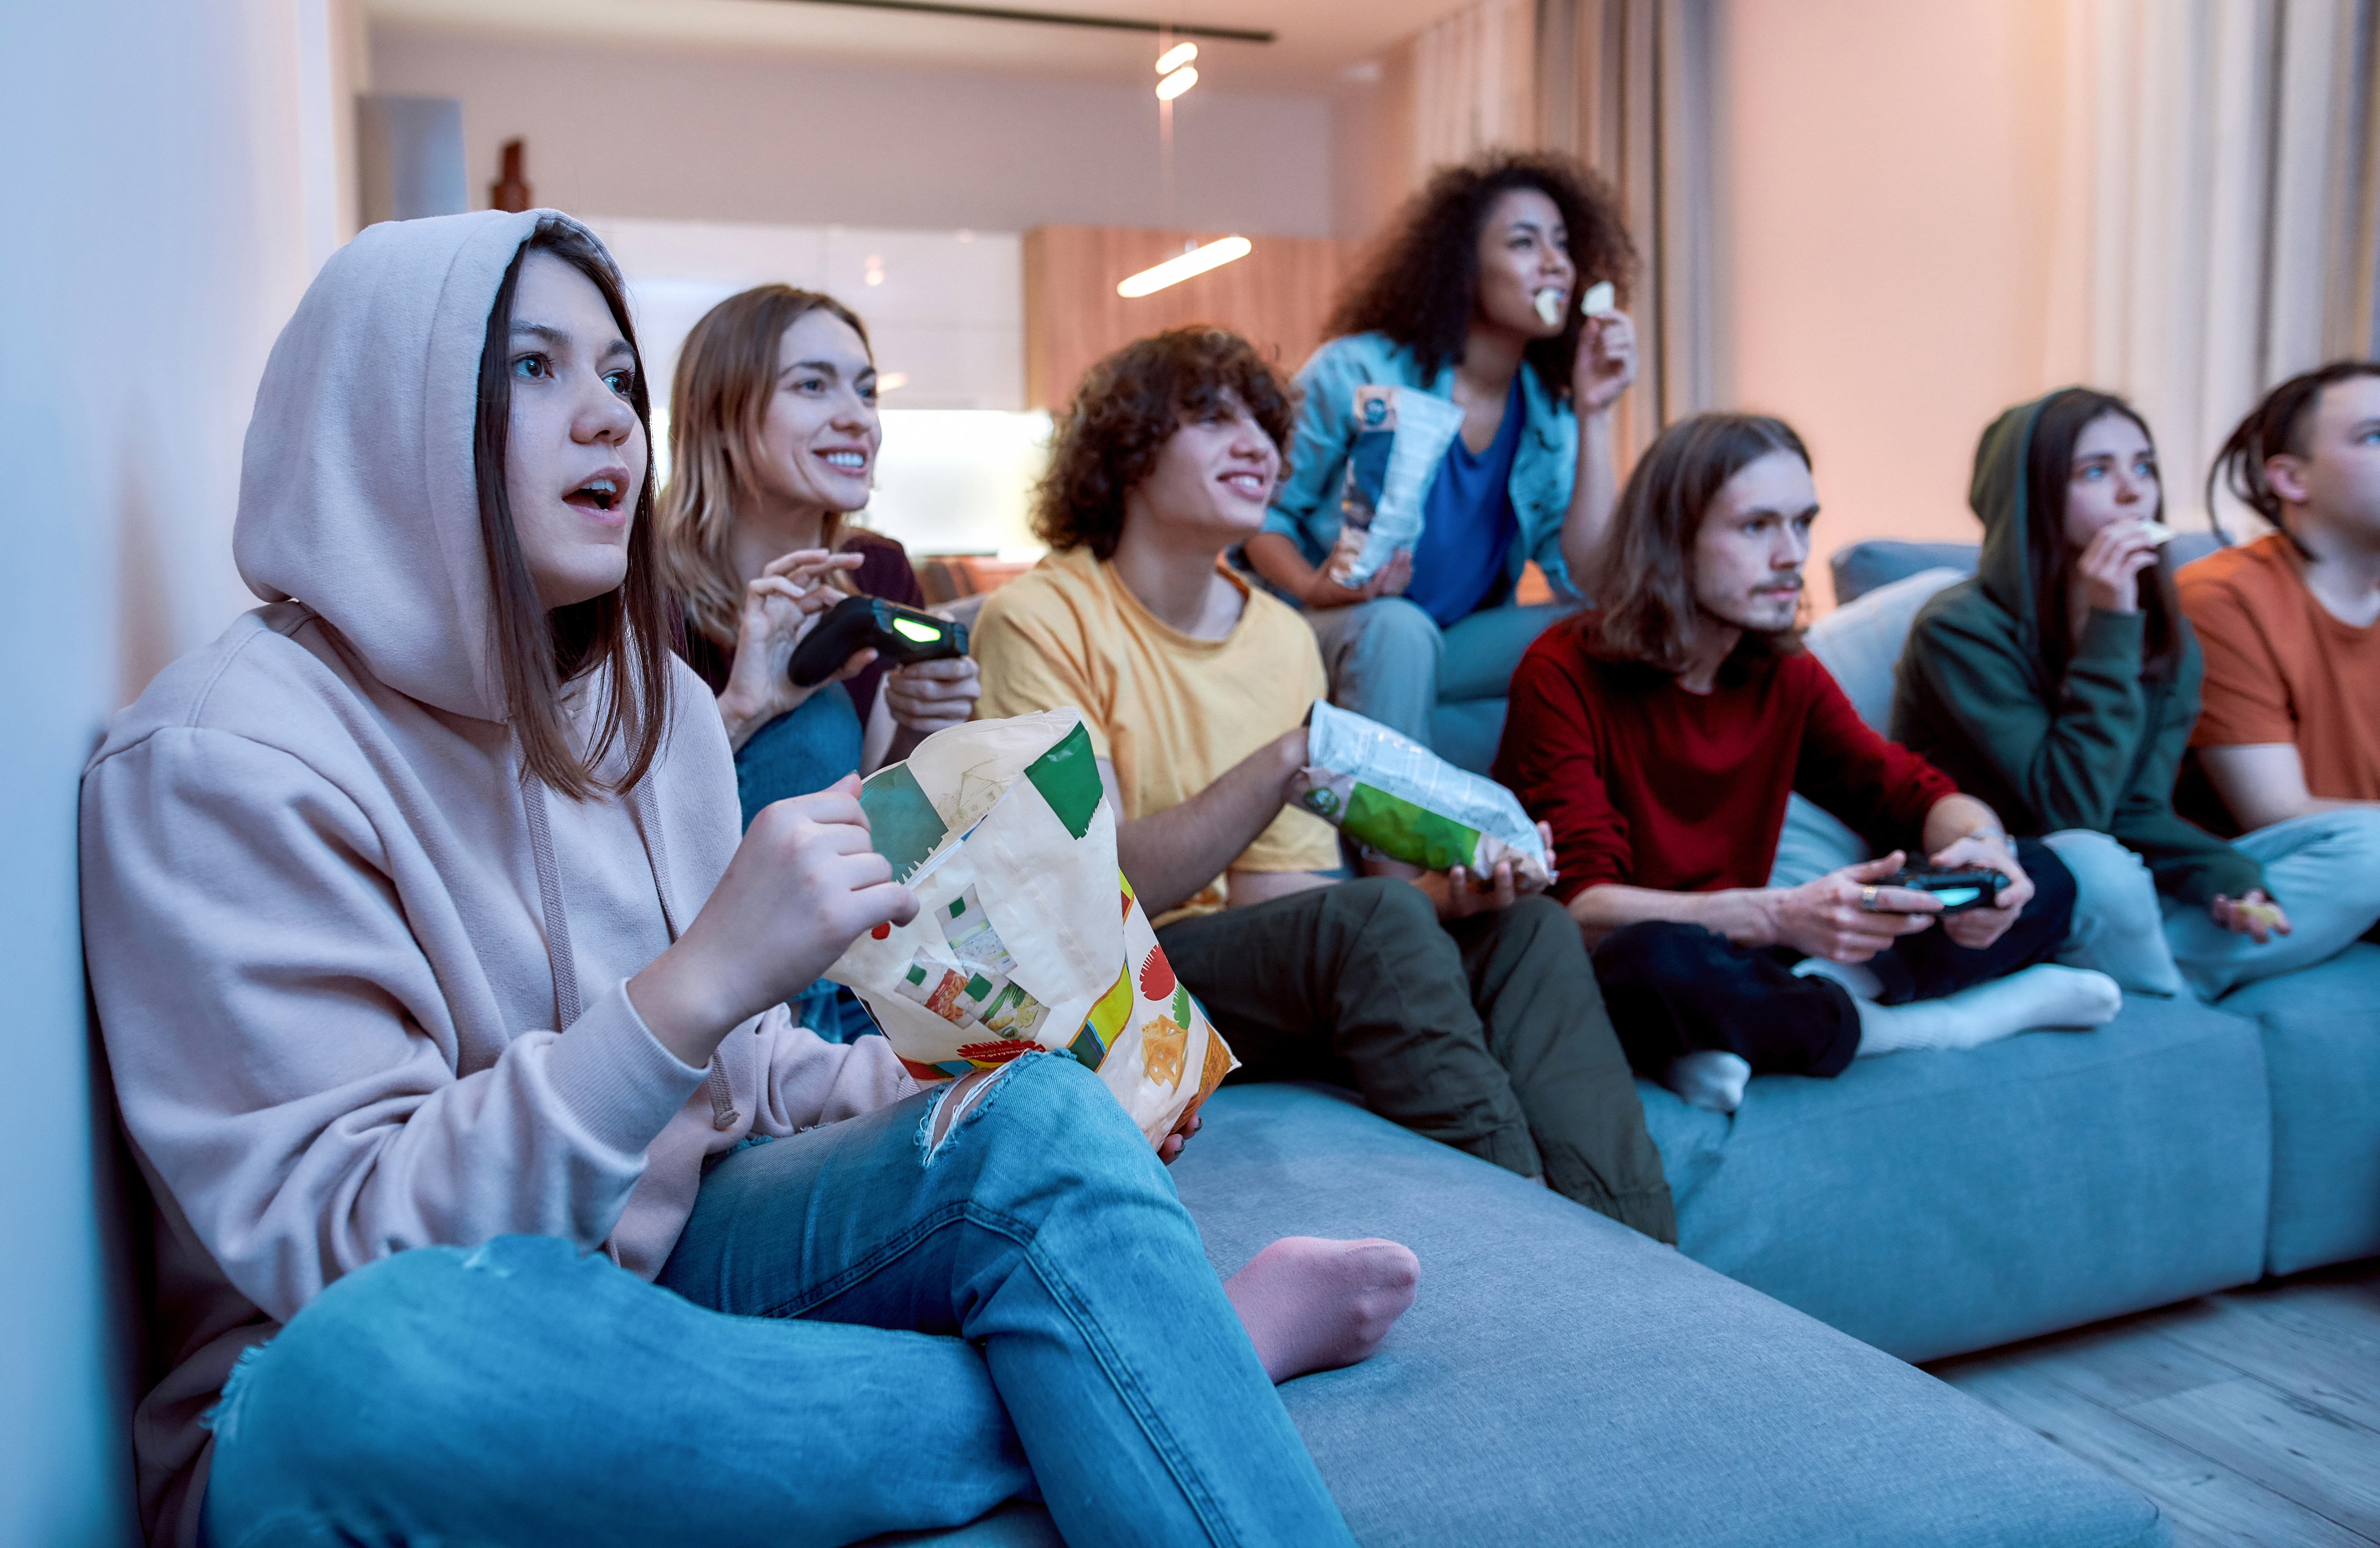 HANG-OUT-CHILL-TEENAGERS-COUCH-shutterstock_1739917139.jpg